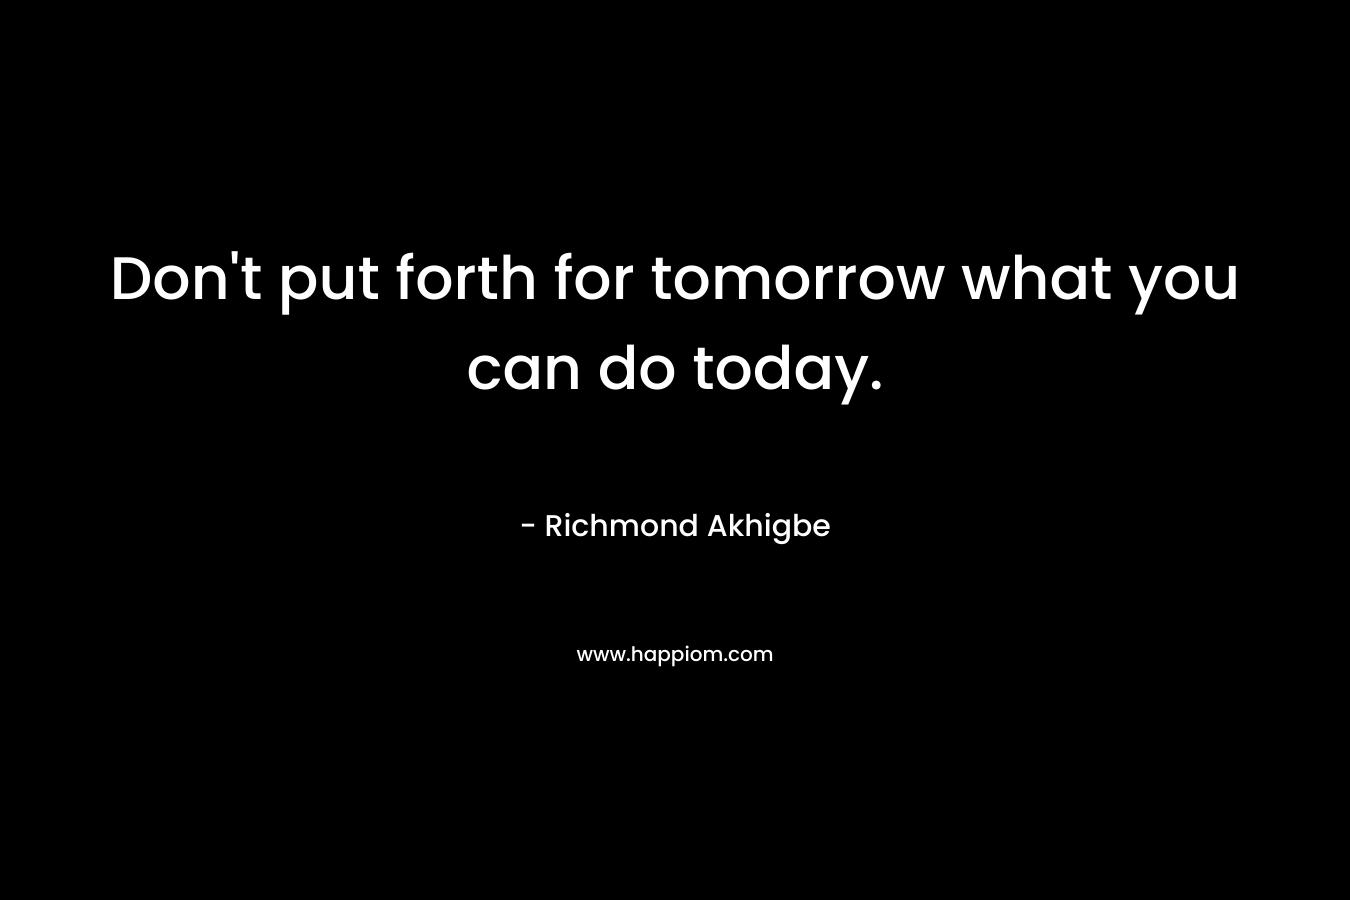 Don’t put forth for tomorrow what you can do today. – Richmond Akhigbe